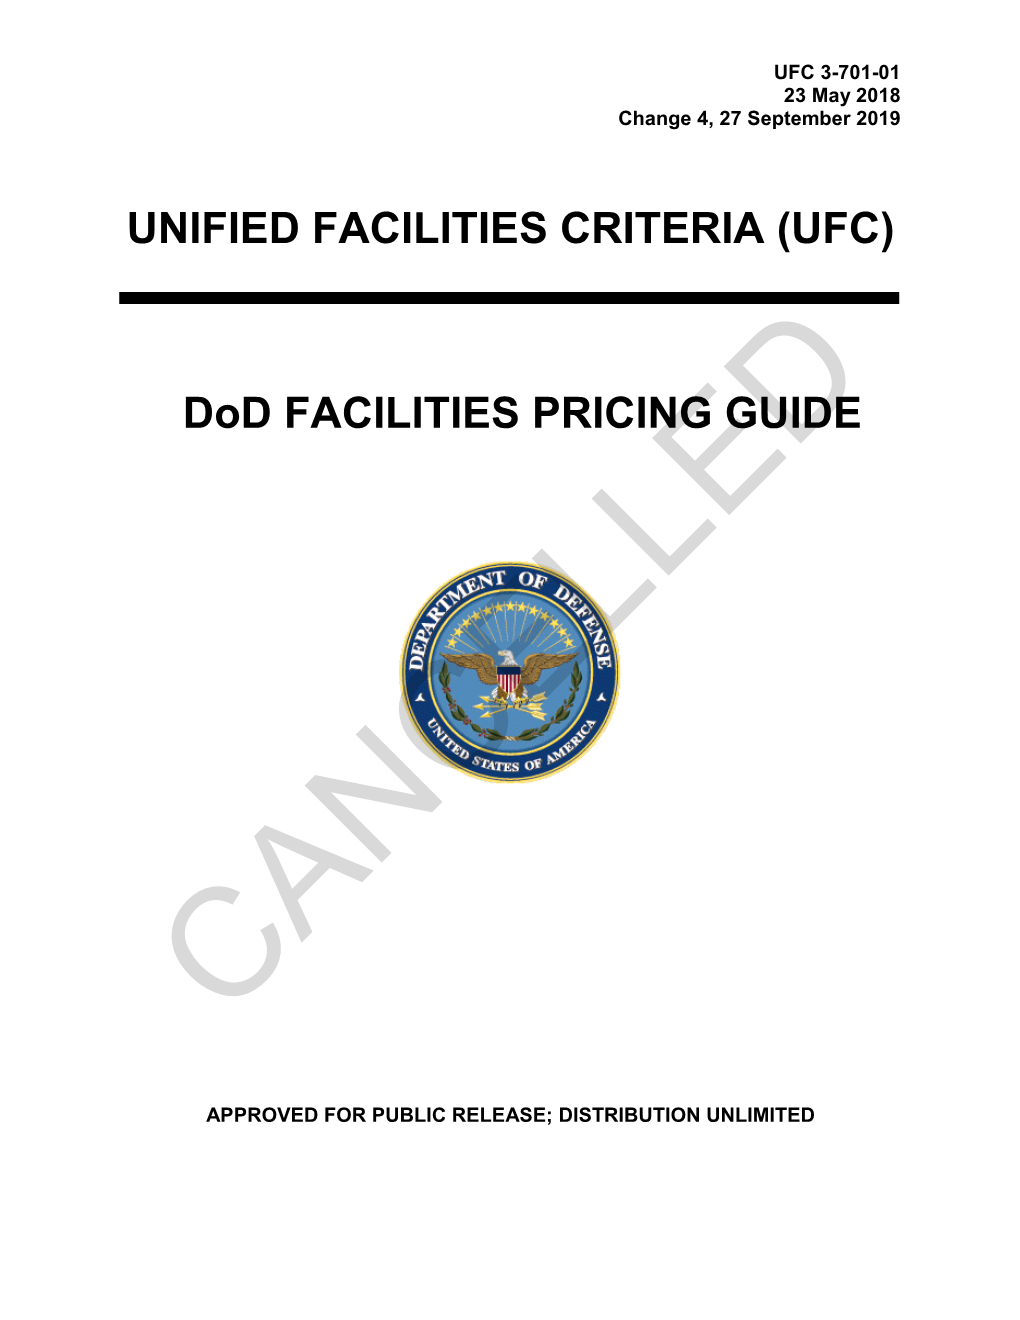 UFC 3-701-01 Dod Facilities Pricing Guide with Change 4